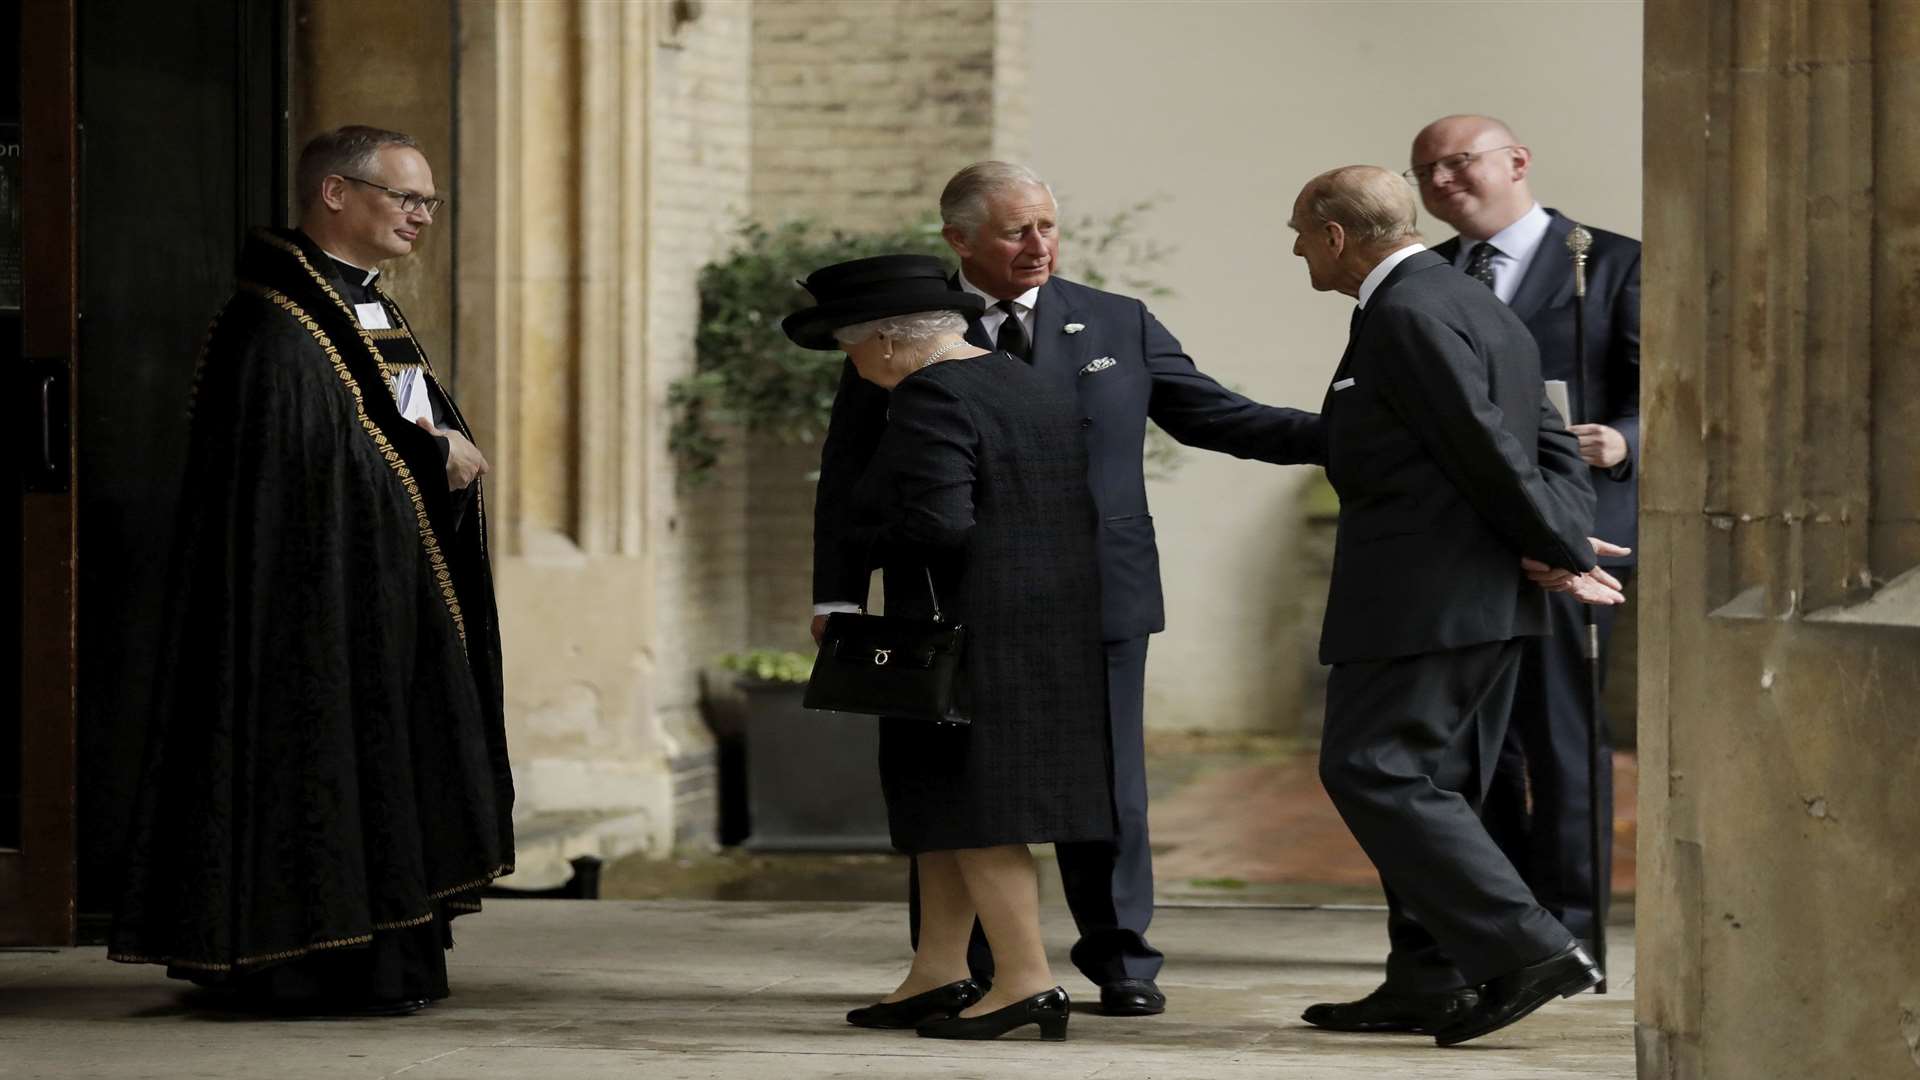 The Queen, Prince Philip and Prince Charles were among mourners at the funeral. Picture from Matt Dunham & PA Wire